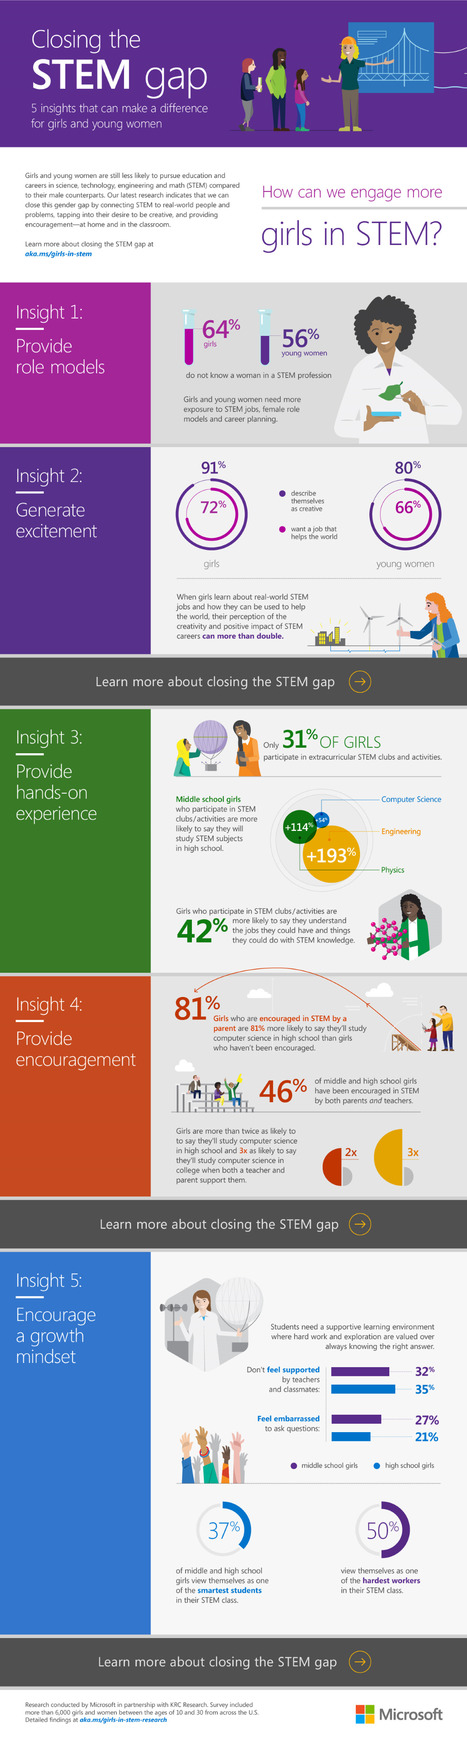 Infographic: Closing the STEM Gender Gap – TechTrends - Medium | iPads, MakerEd and More  in Education | Scoop.it